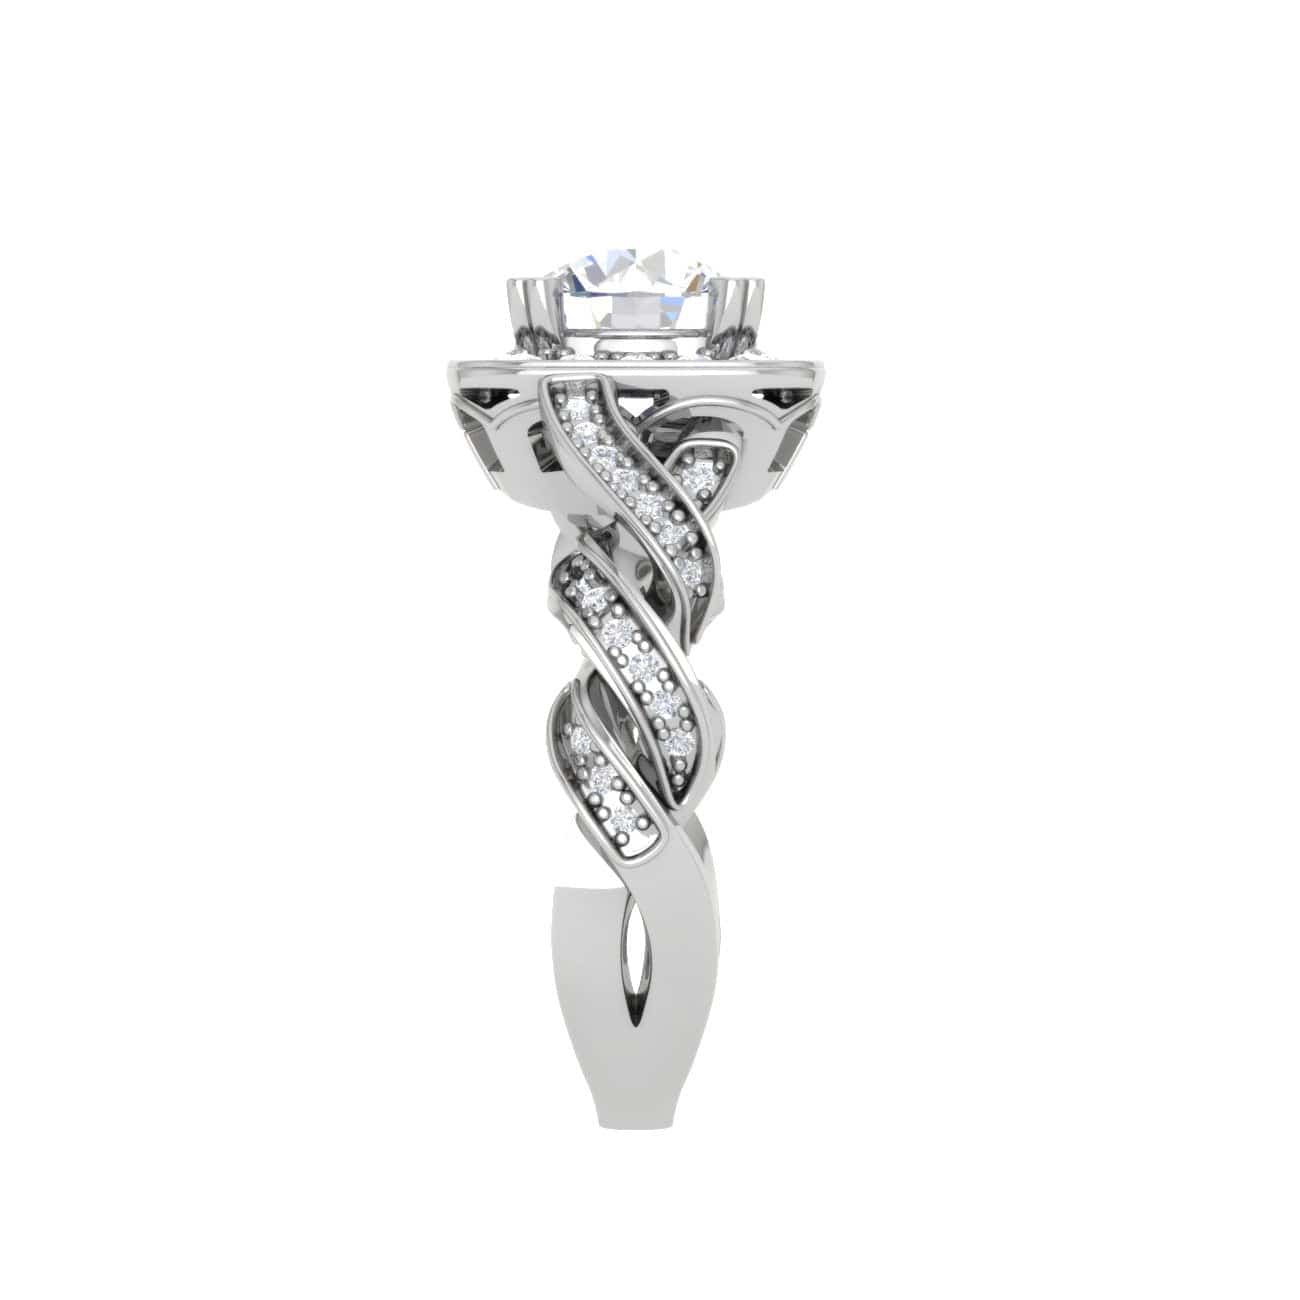 50-Pointer Lab Grown Solitaire Square Halo Diamond Twisted Shank Platinum Ring JL PT LG G REHS1530